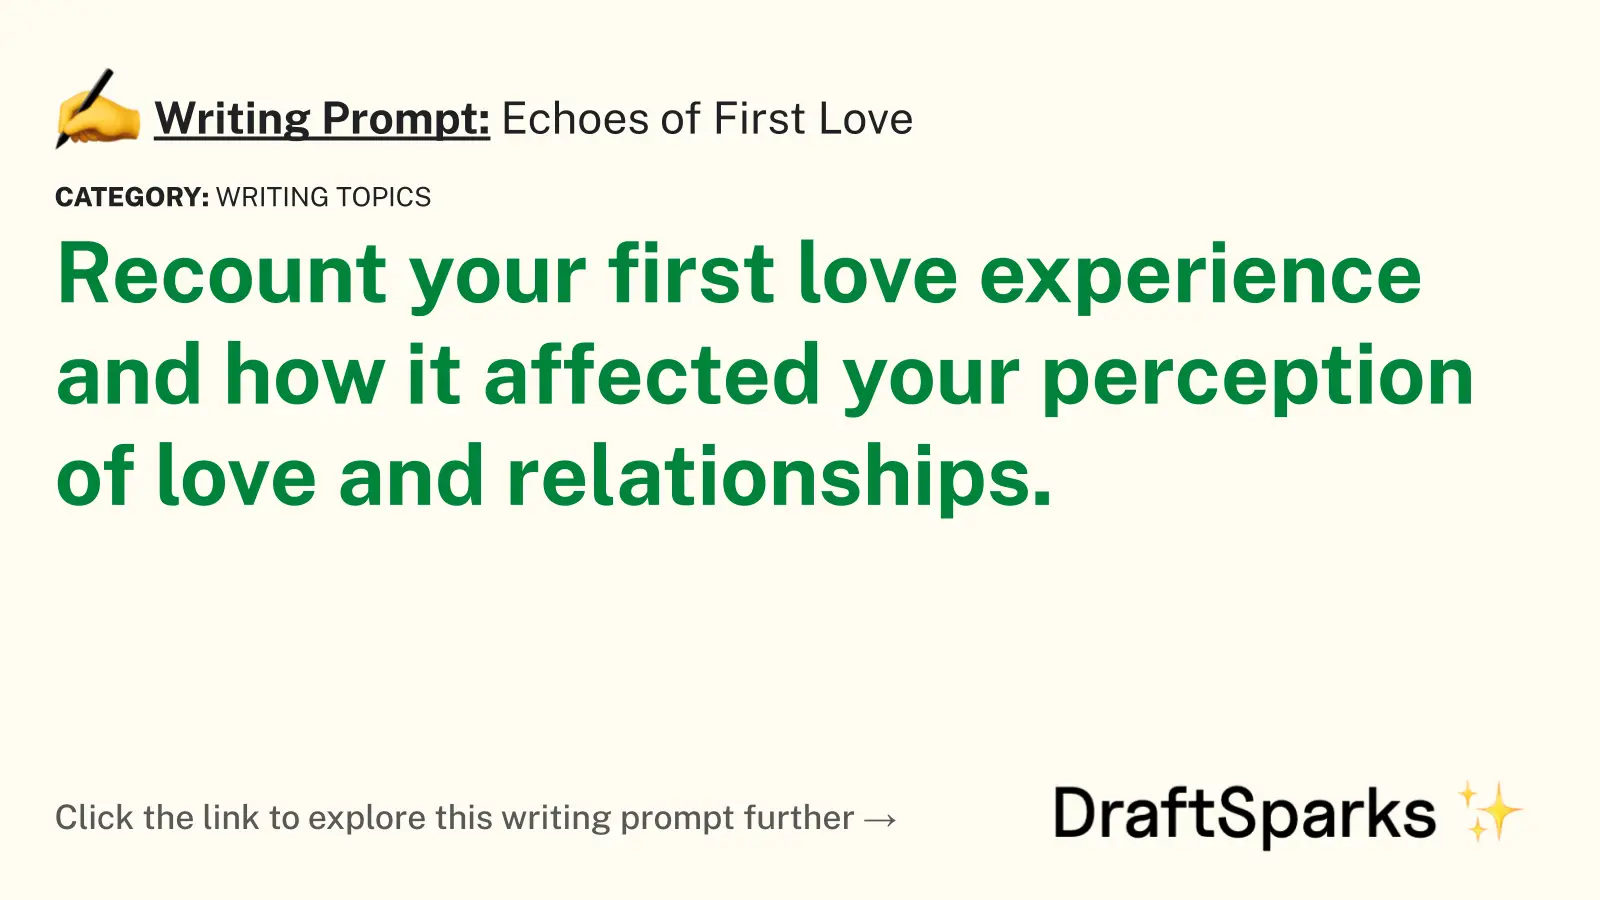 Echoes of First Love